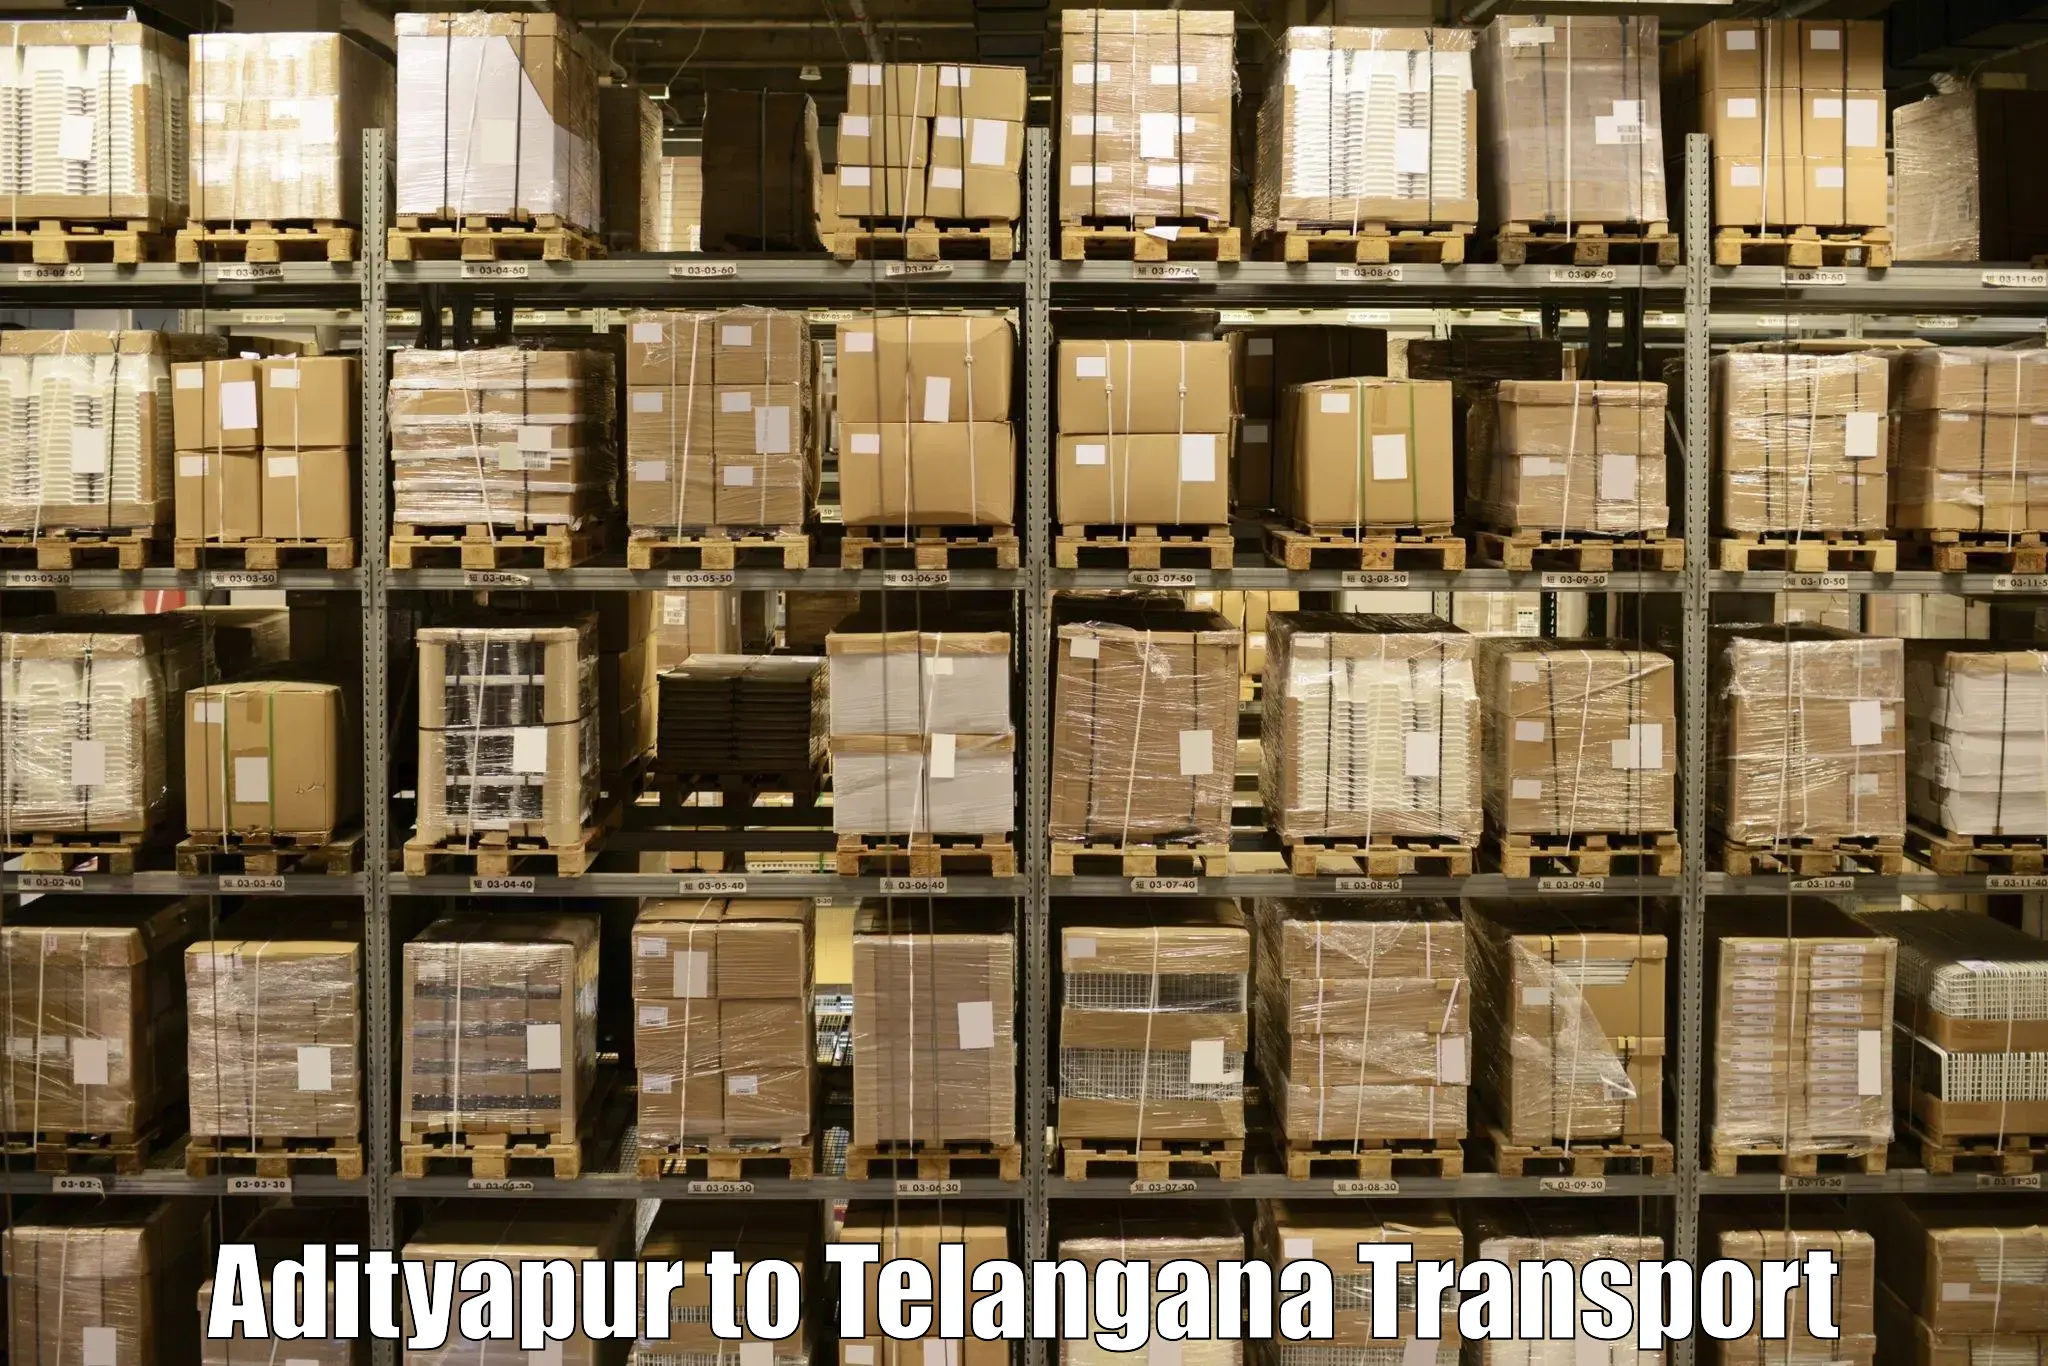 Express transport services Adityapur to Moinabad